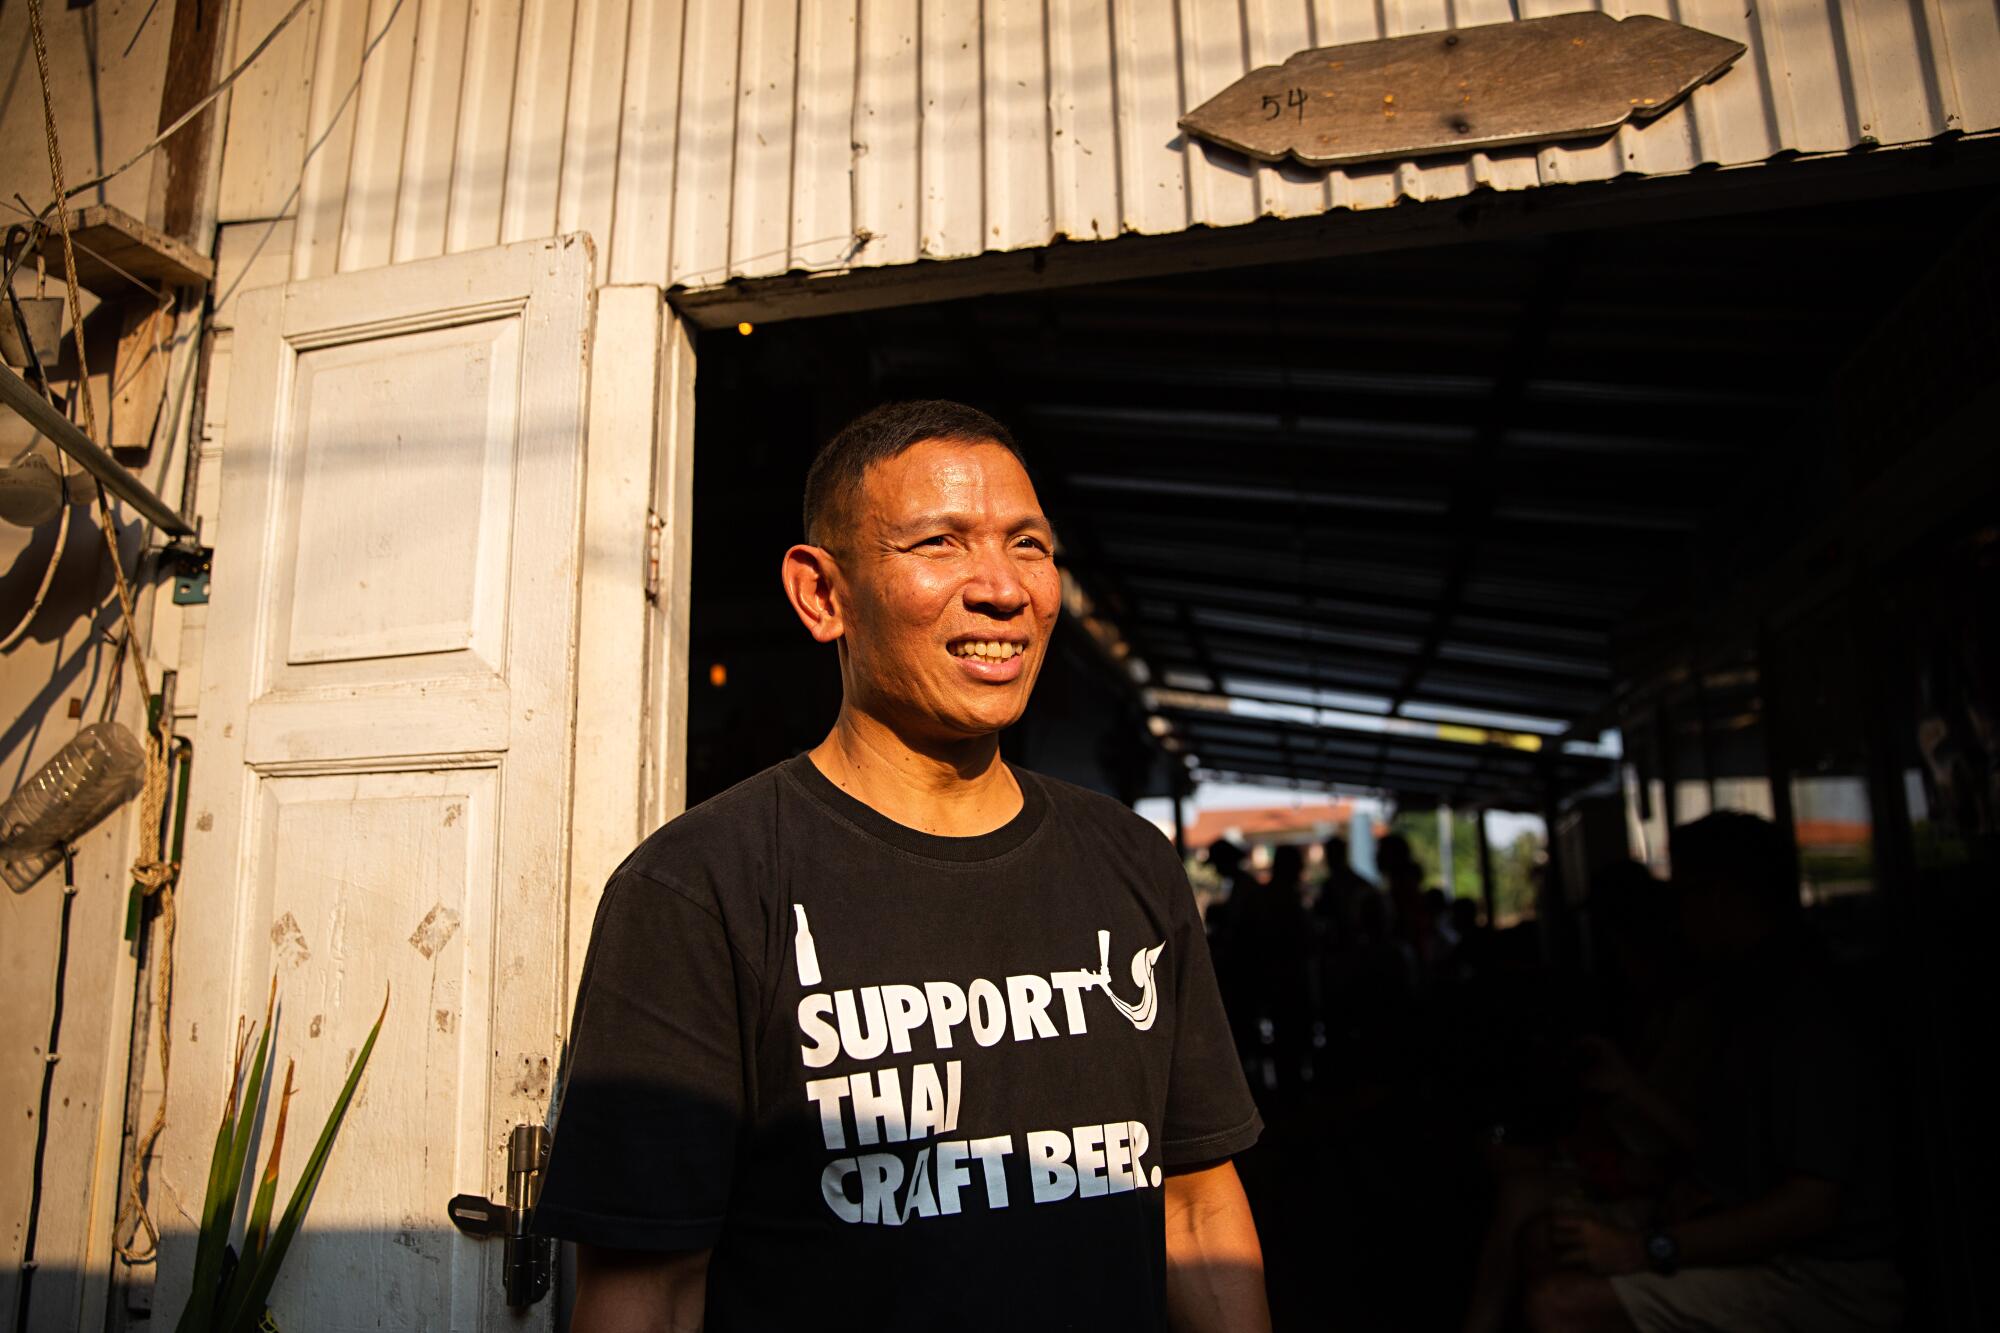 Wichit Saiklao stands at the entrance to Chit Beer, his brewhouse on Koh Kret island, Thailand.